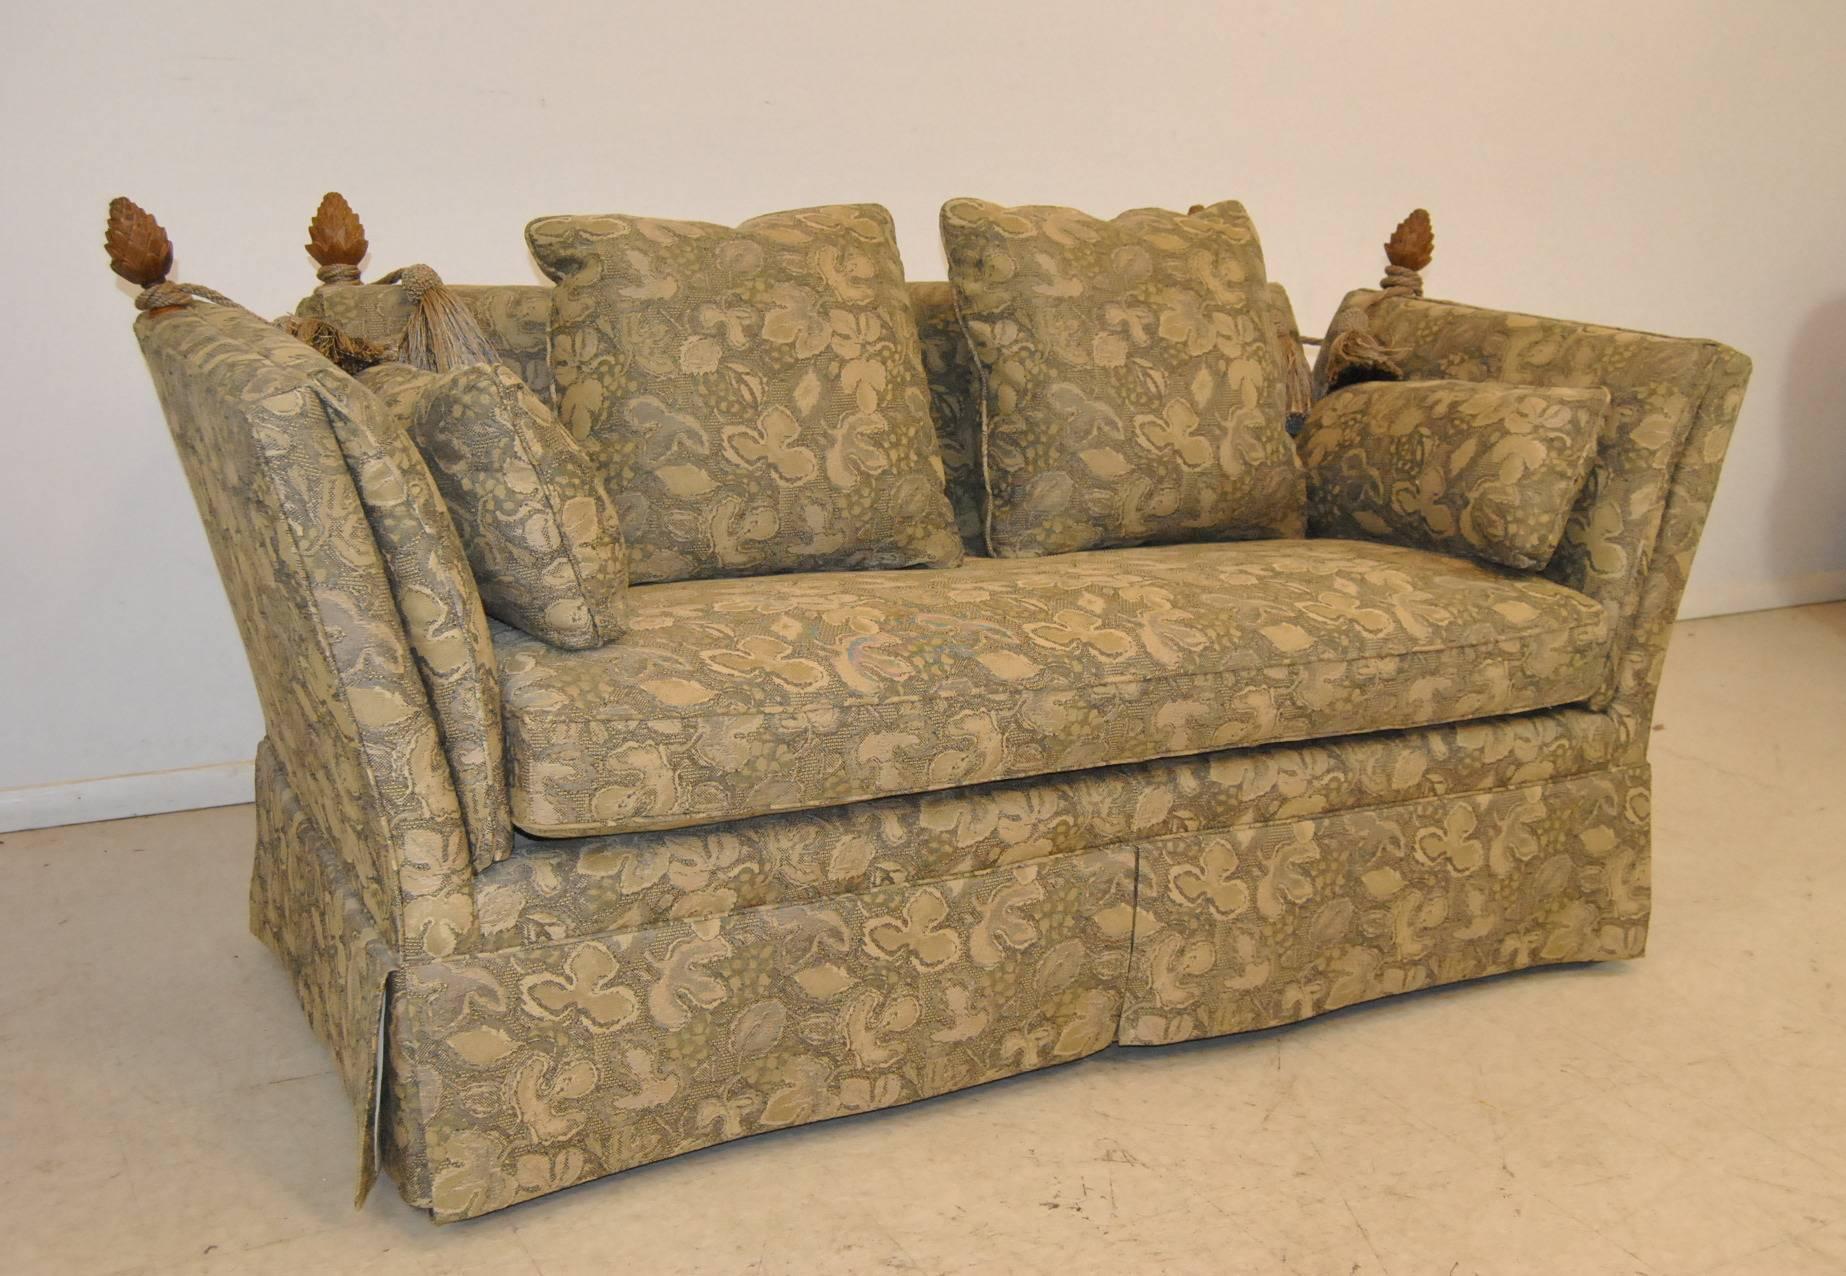 A classic knole style settee by Baker Furniture. It features carved pineapple finials and a skirted bottom. The upholstery is in great condition with no stains or wear. The pillow photo is the closest to the true color. The dimensions are 68